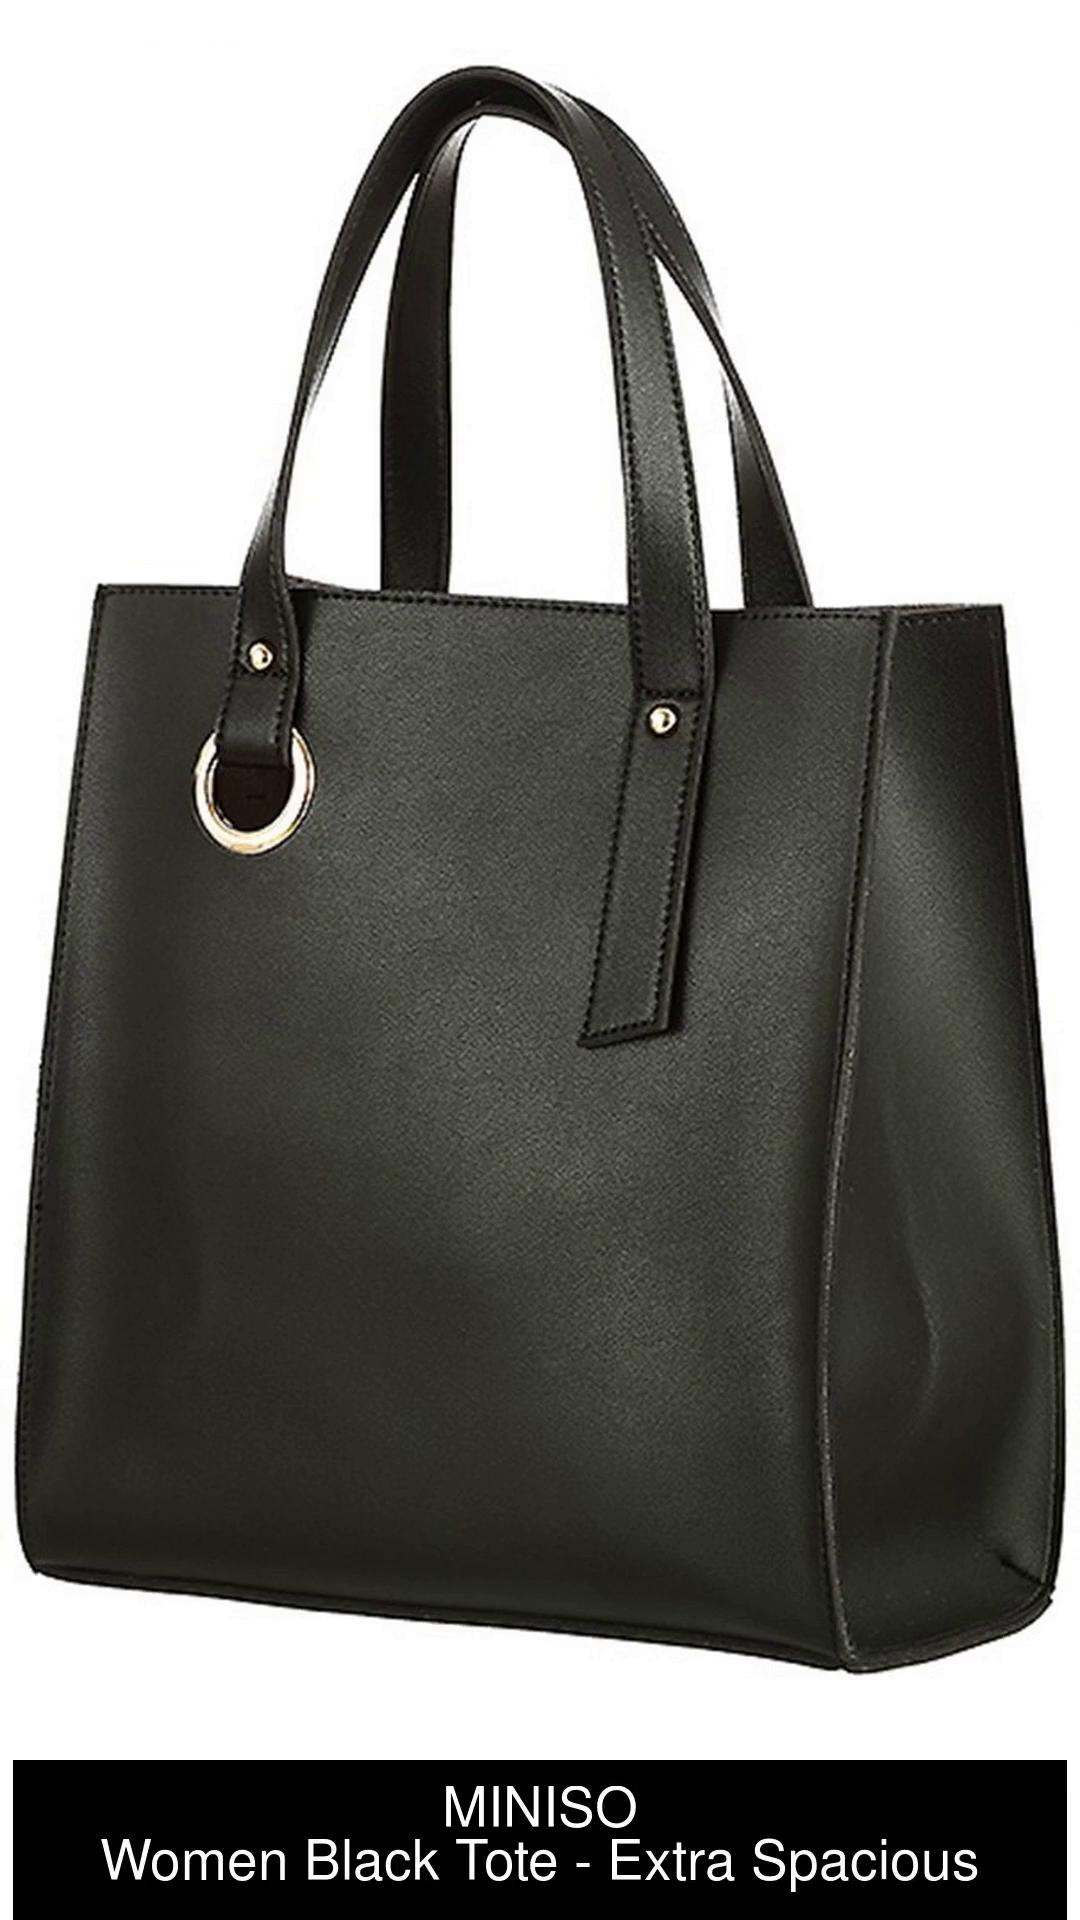 Women Black Tote - Mini Price in India, Full Specifications & Offers